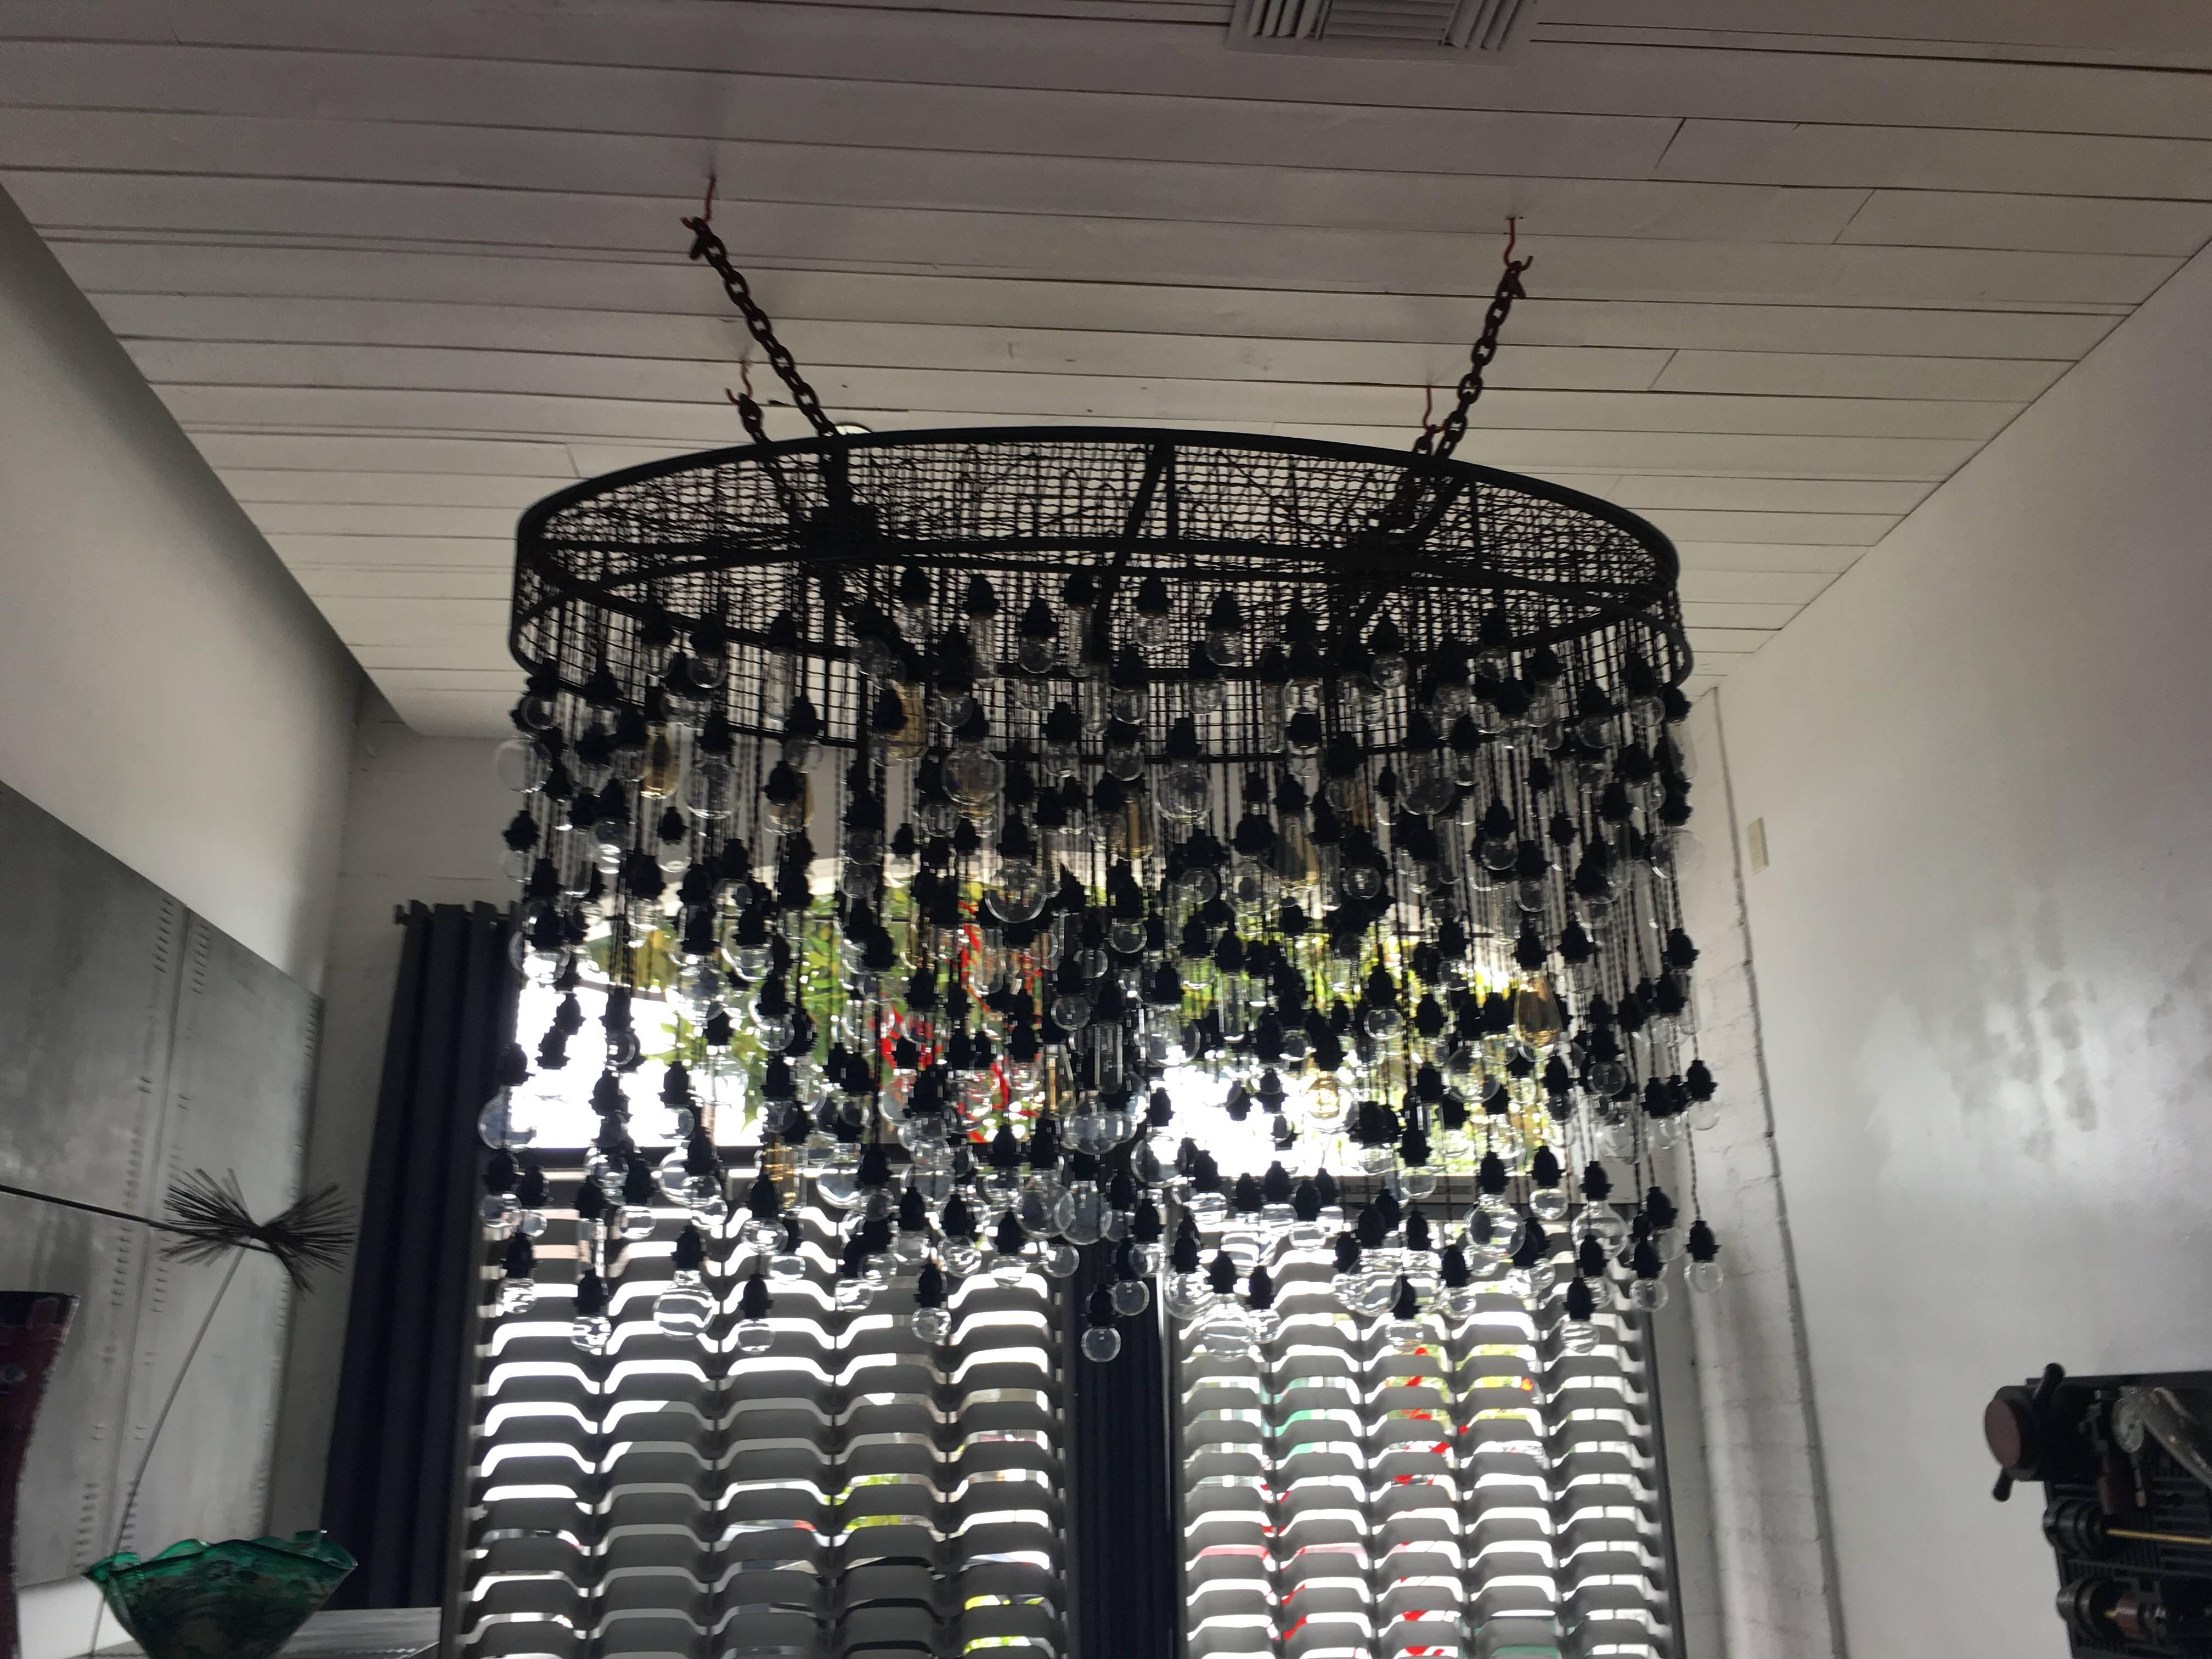 Most unbelievable and breathtaking chandelier. Mixture of functional and decorative light bulbs in oval frame. The hanging chain you see in the picture is temporary, the chandelier can be hung directly onto the ceiling without chain.